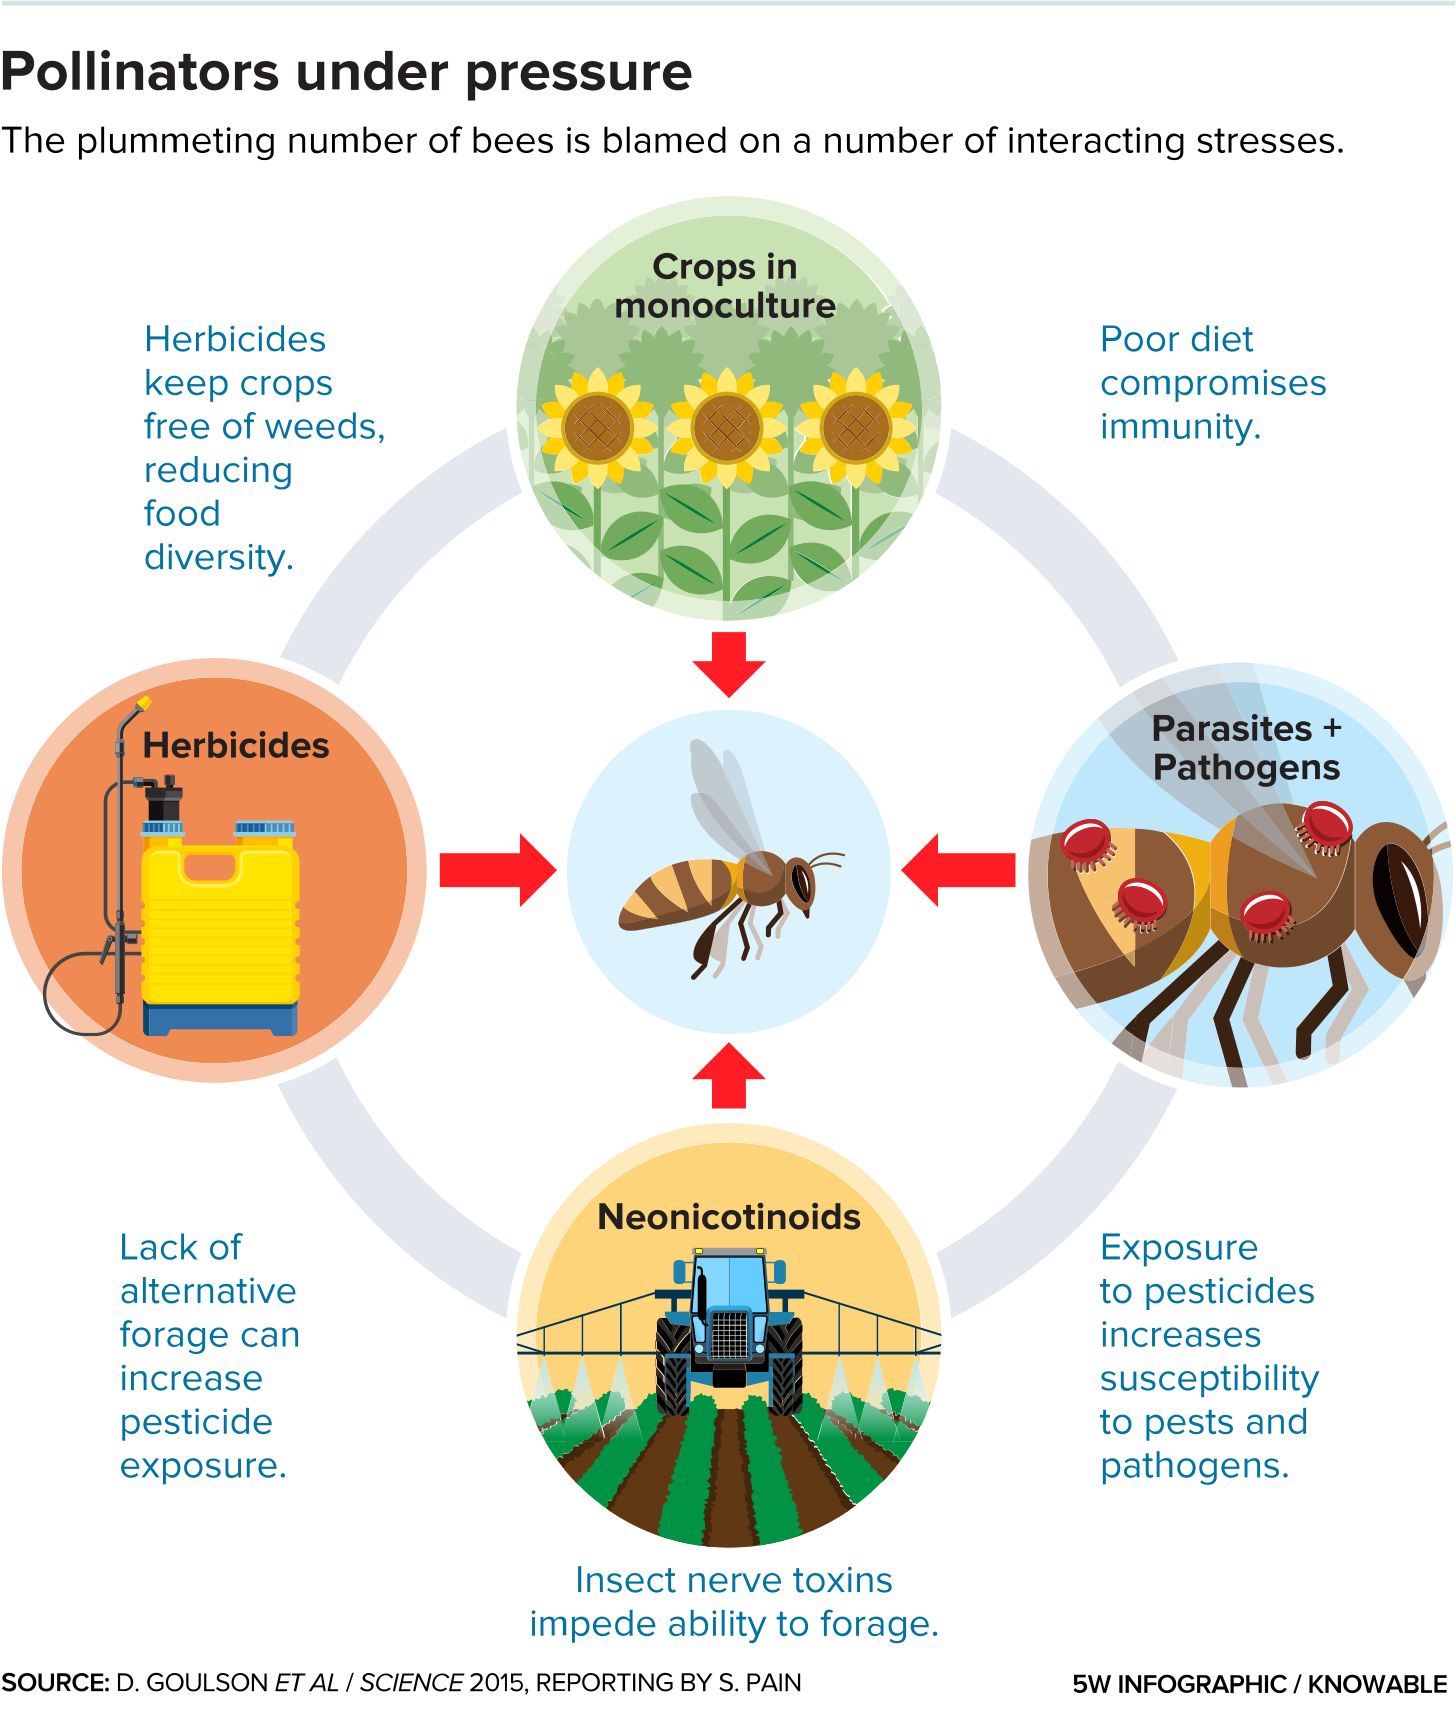 A diagram highlights four categories of threats to bees: herbicides, neonicotinoids, monoculture and parasites and pathogens.